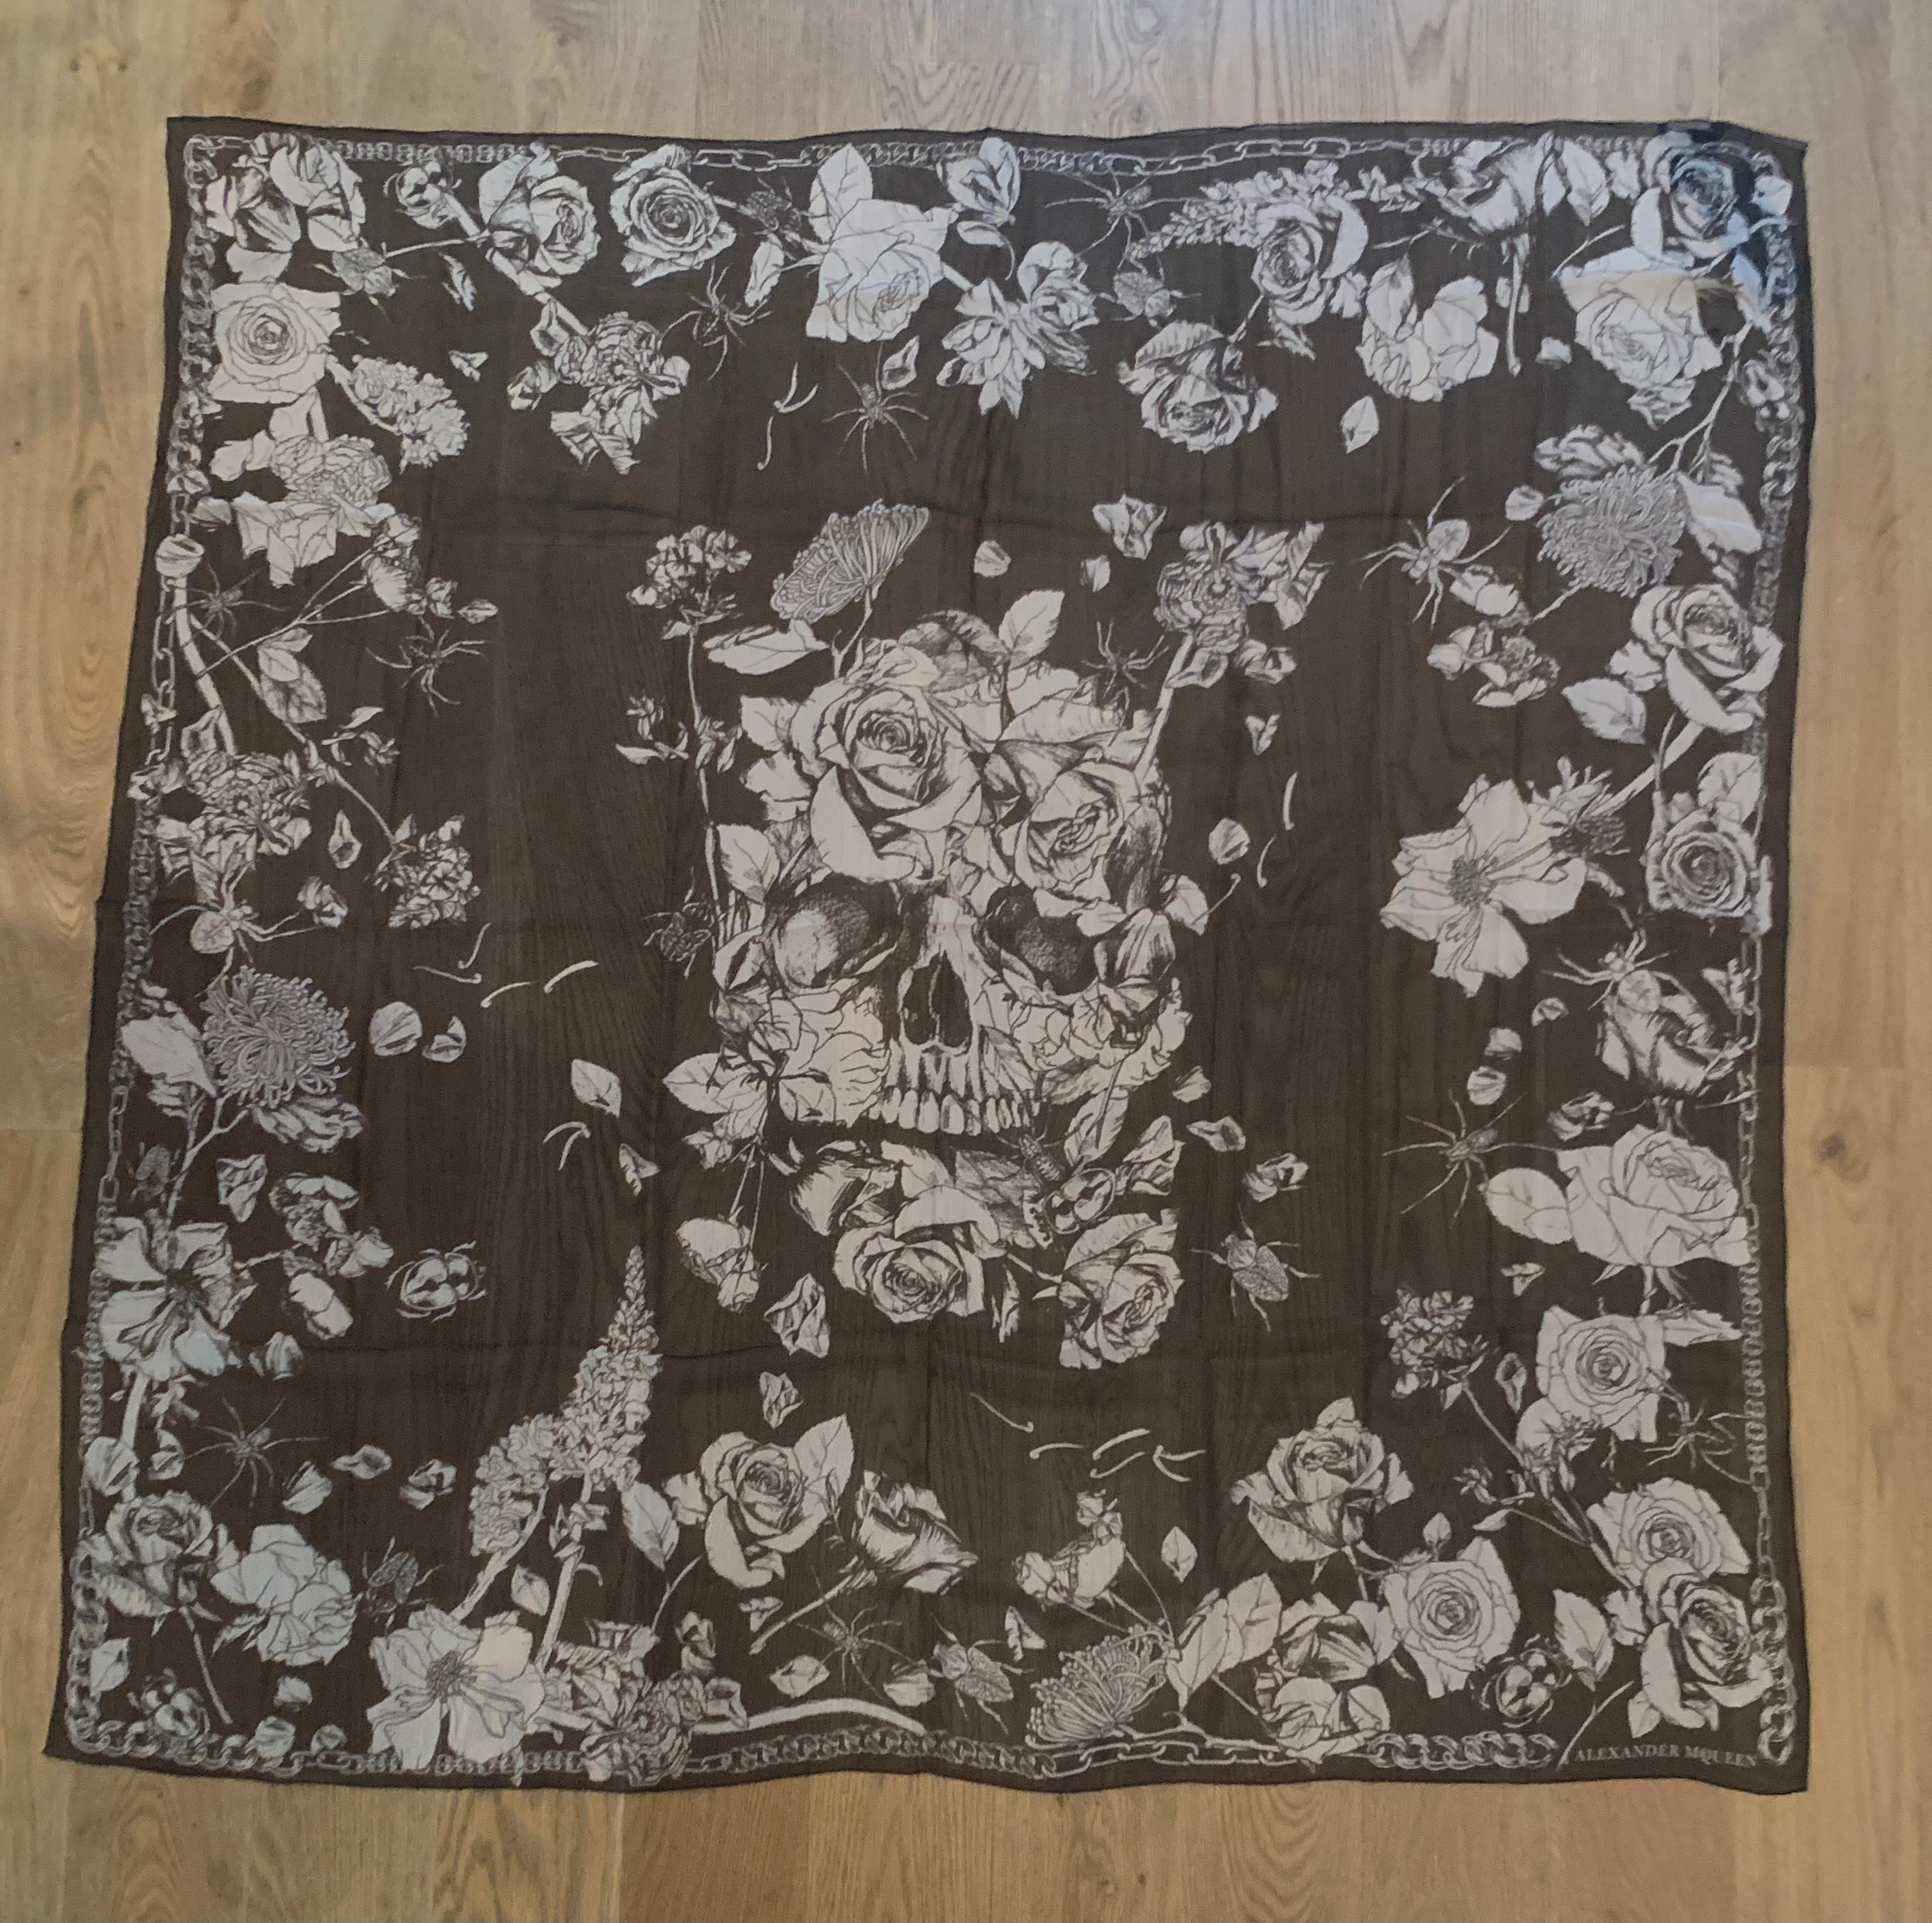 New Alexander McQueen large semi-sheer black and white silk chiffon scarf featuring a skull at center with roses and insects throughout, chain print around border. Signed Alexander McQueen at bottom right corner.

Large size makes it great for a